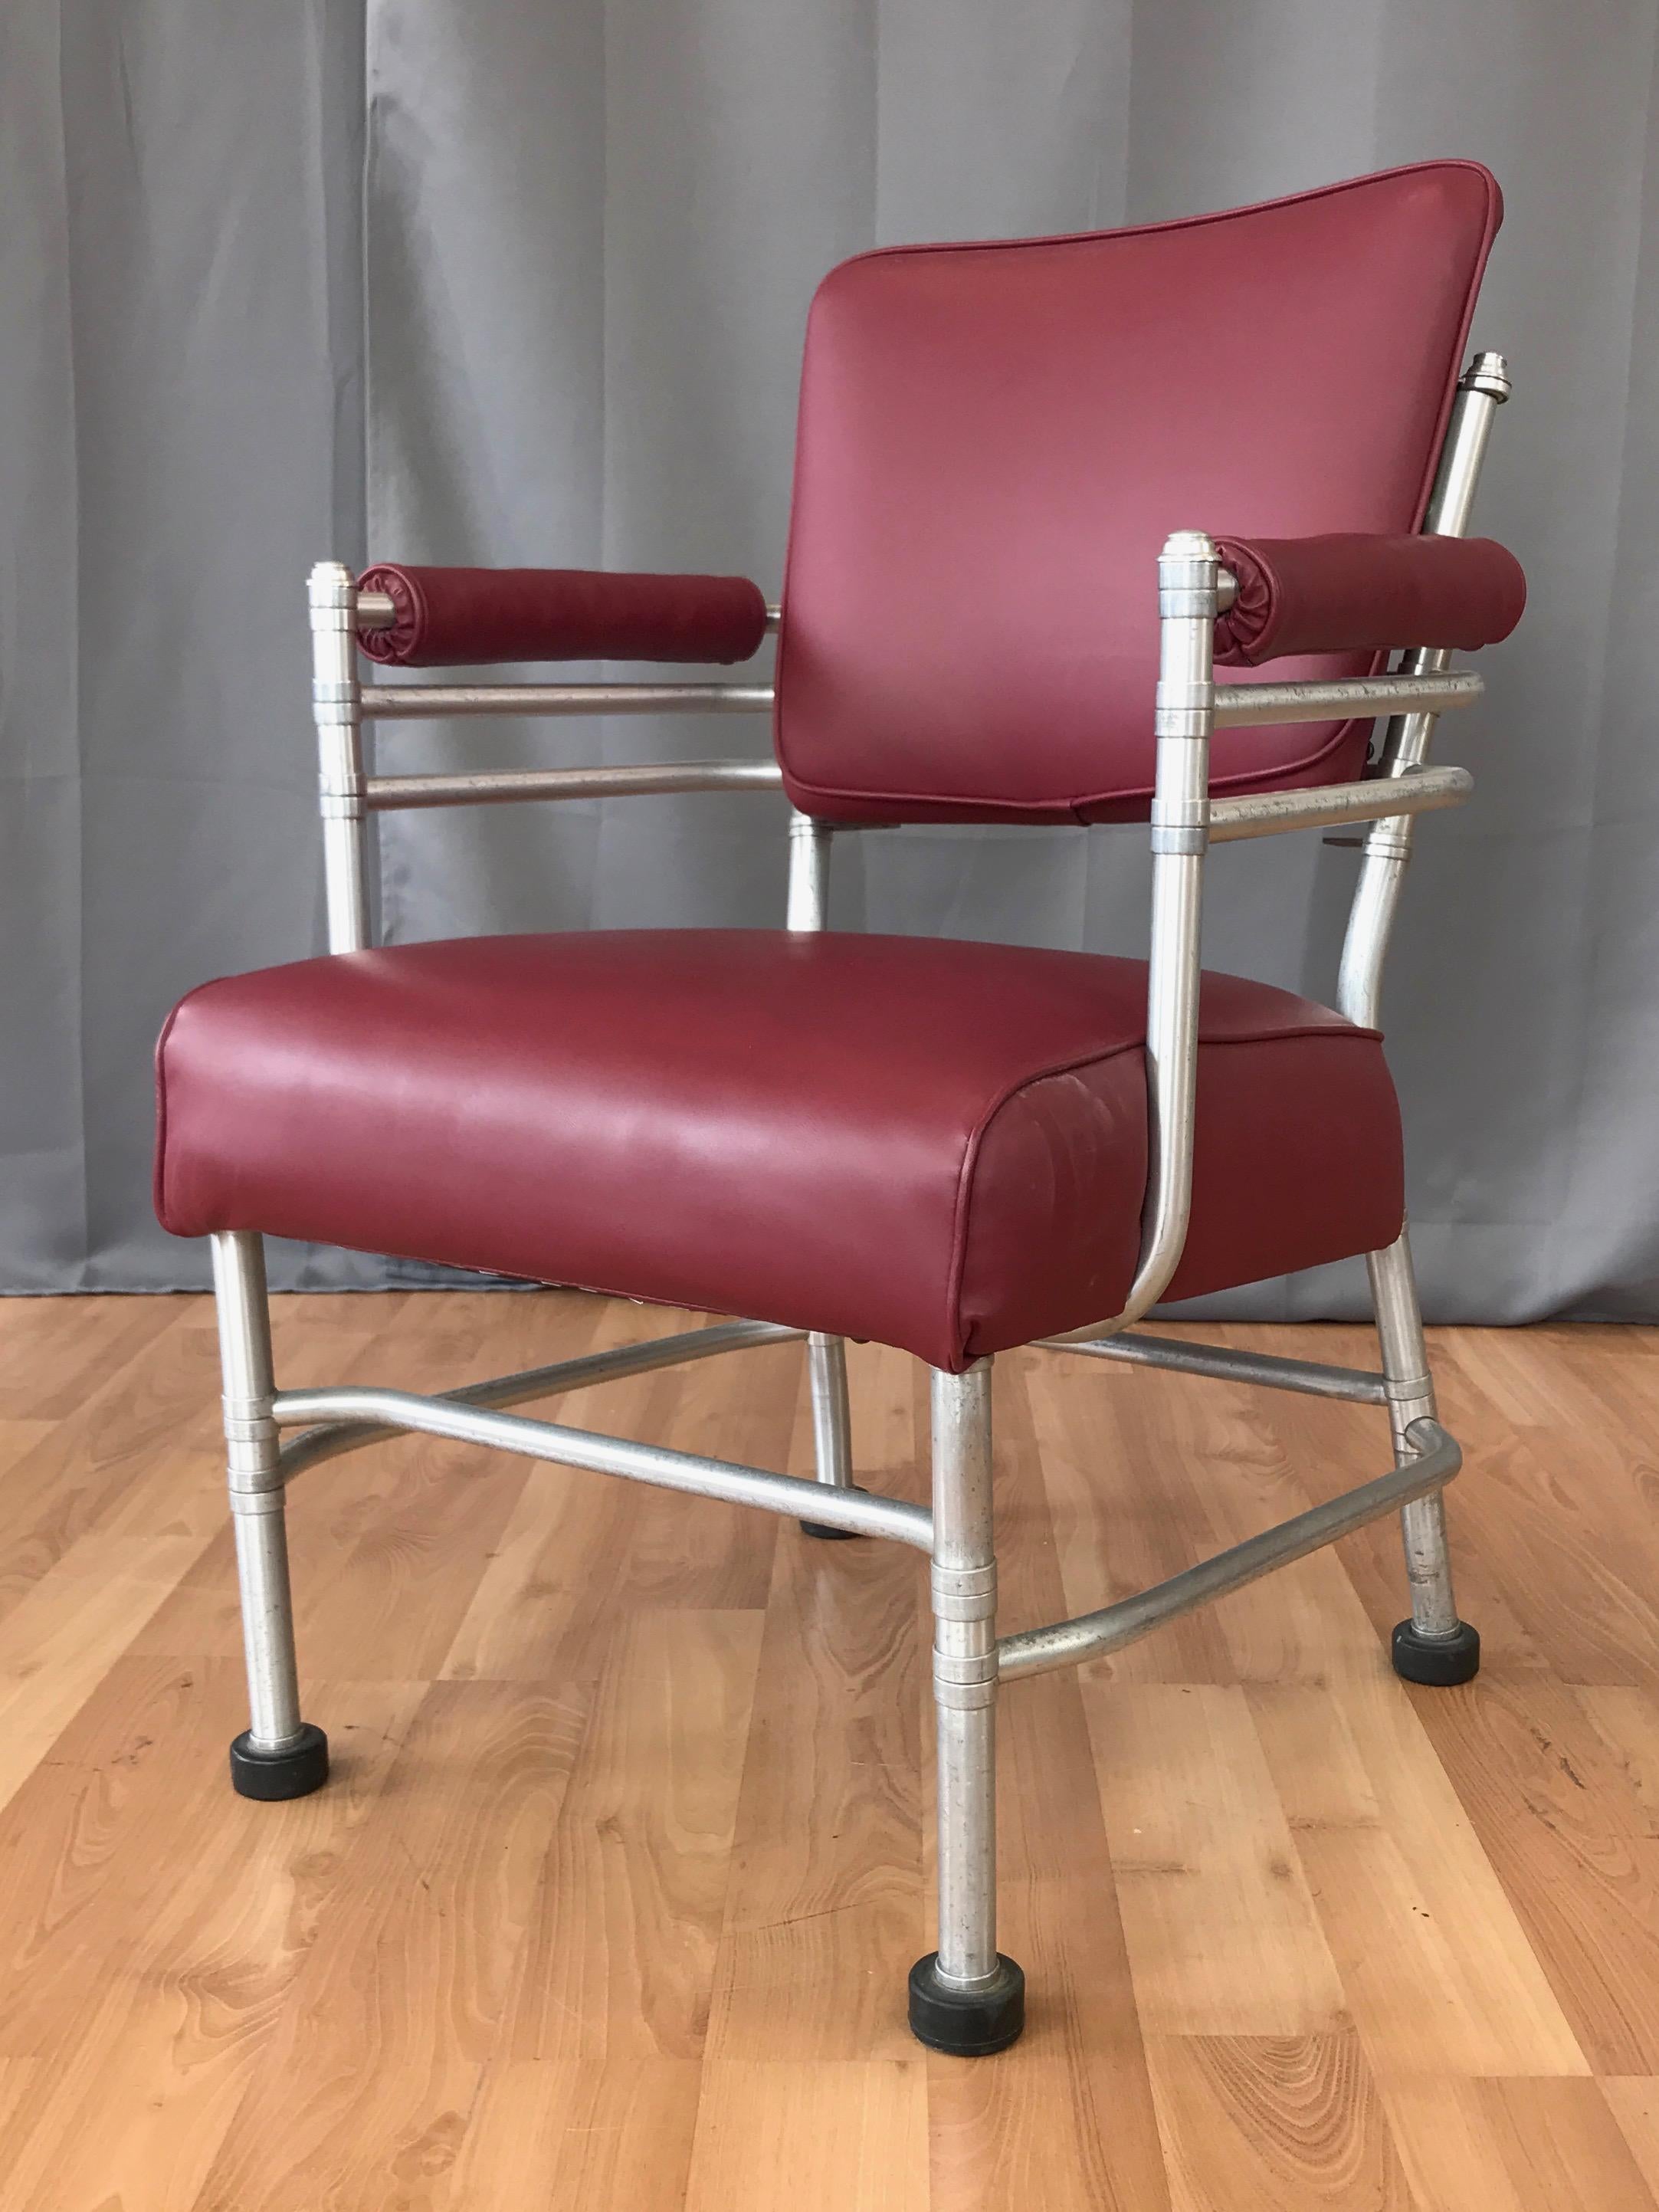 A rare mid-1930s Art Deco aluminum armchair by important American designer Warren McArthur.

Displays McArthur’s signature Streamline Moderne-meets-Machine Age aesthetic, with a painstakingly crafted multi-piece anodized aluminum tubular frame over